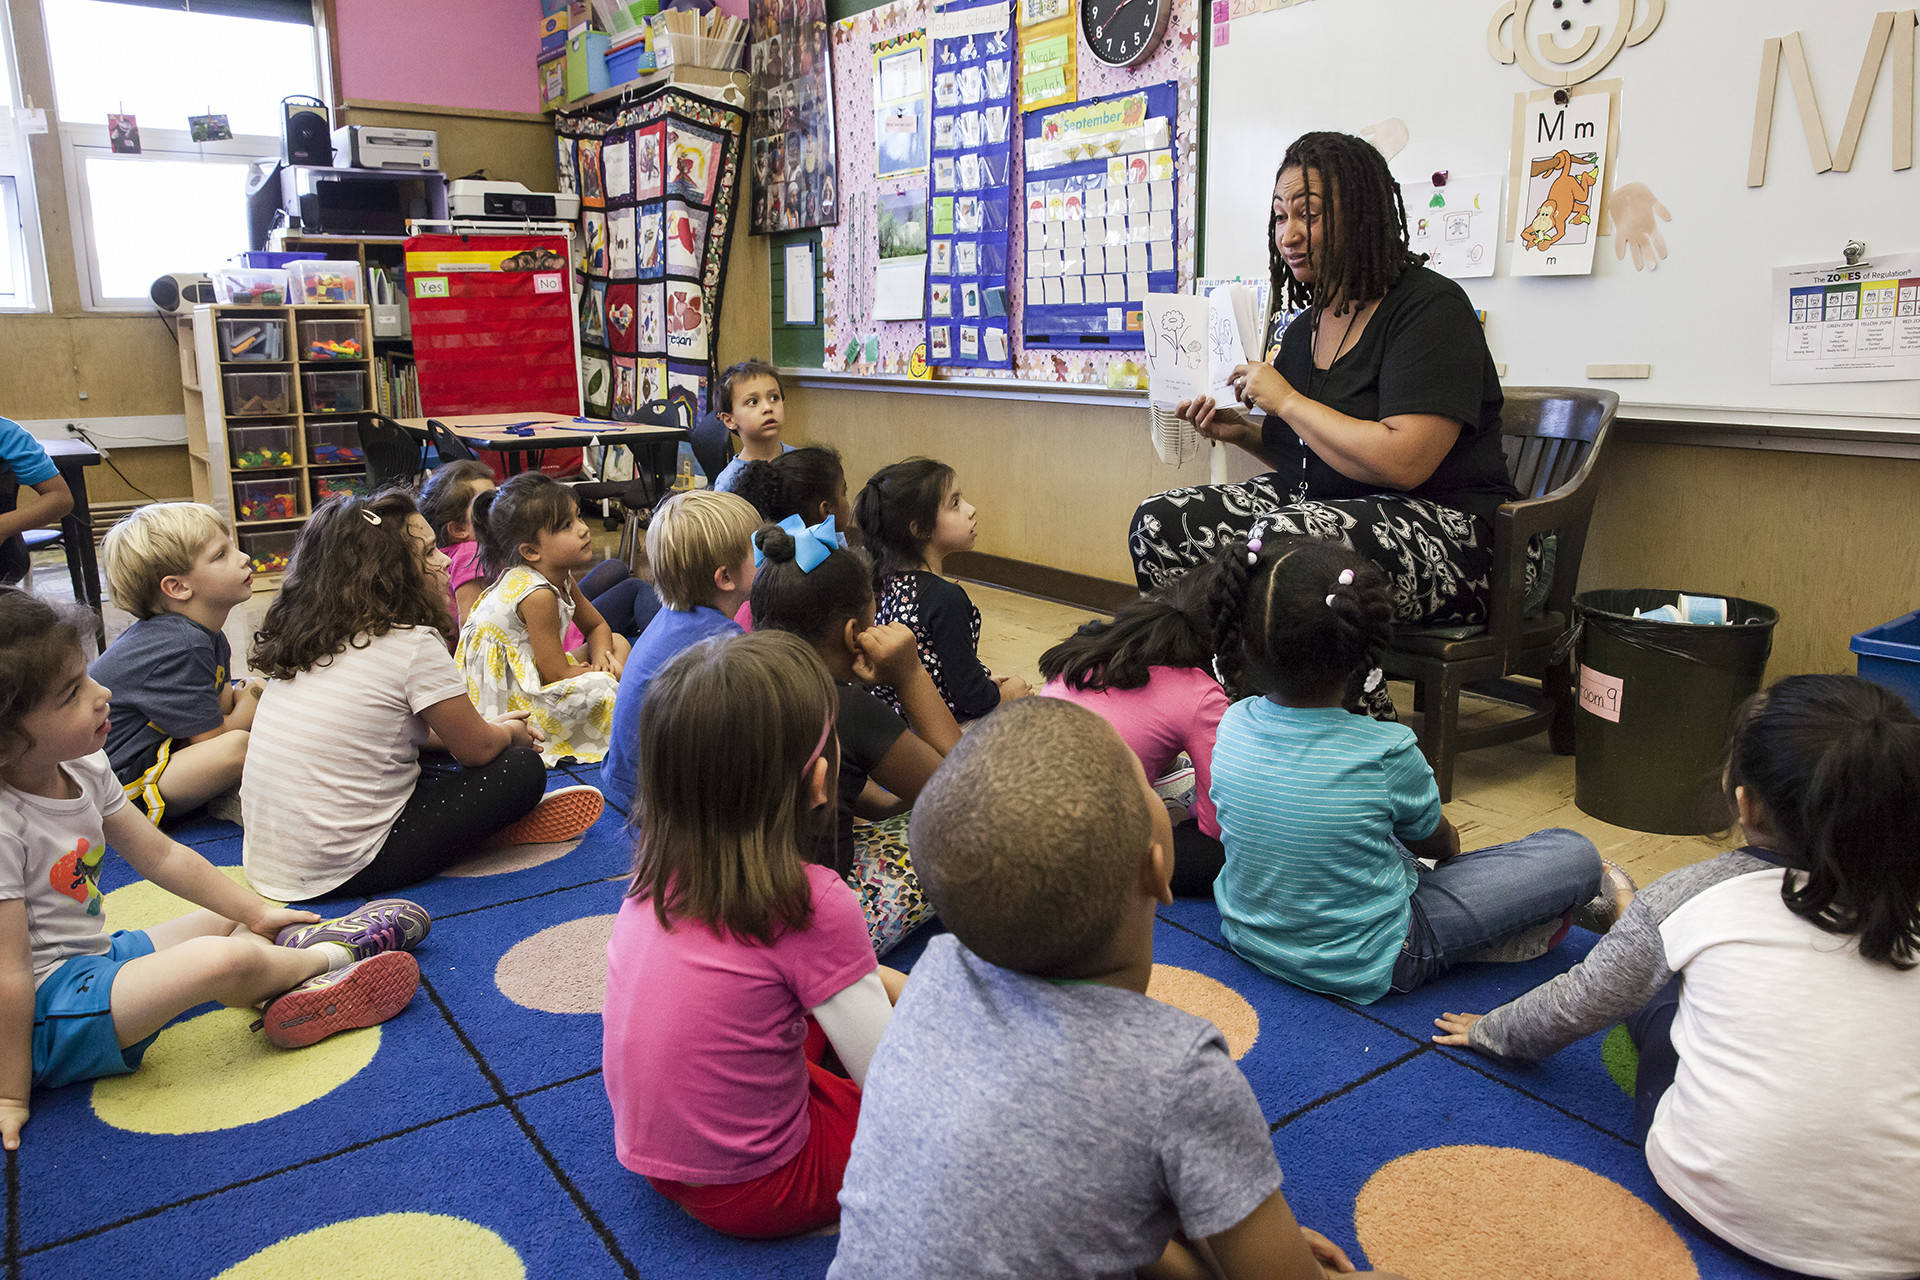 Tontra Love, a transitional kindergarten teacher at Sequoia Elementary School in Oakland, reads to her students at the end of class on Sept. 6, 2016. Brittany Hosea-Small/KQED